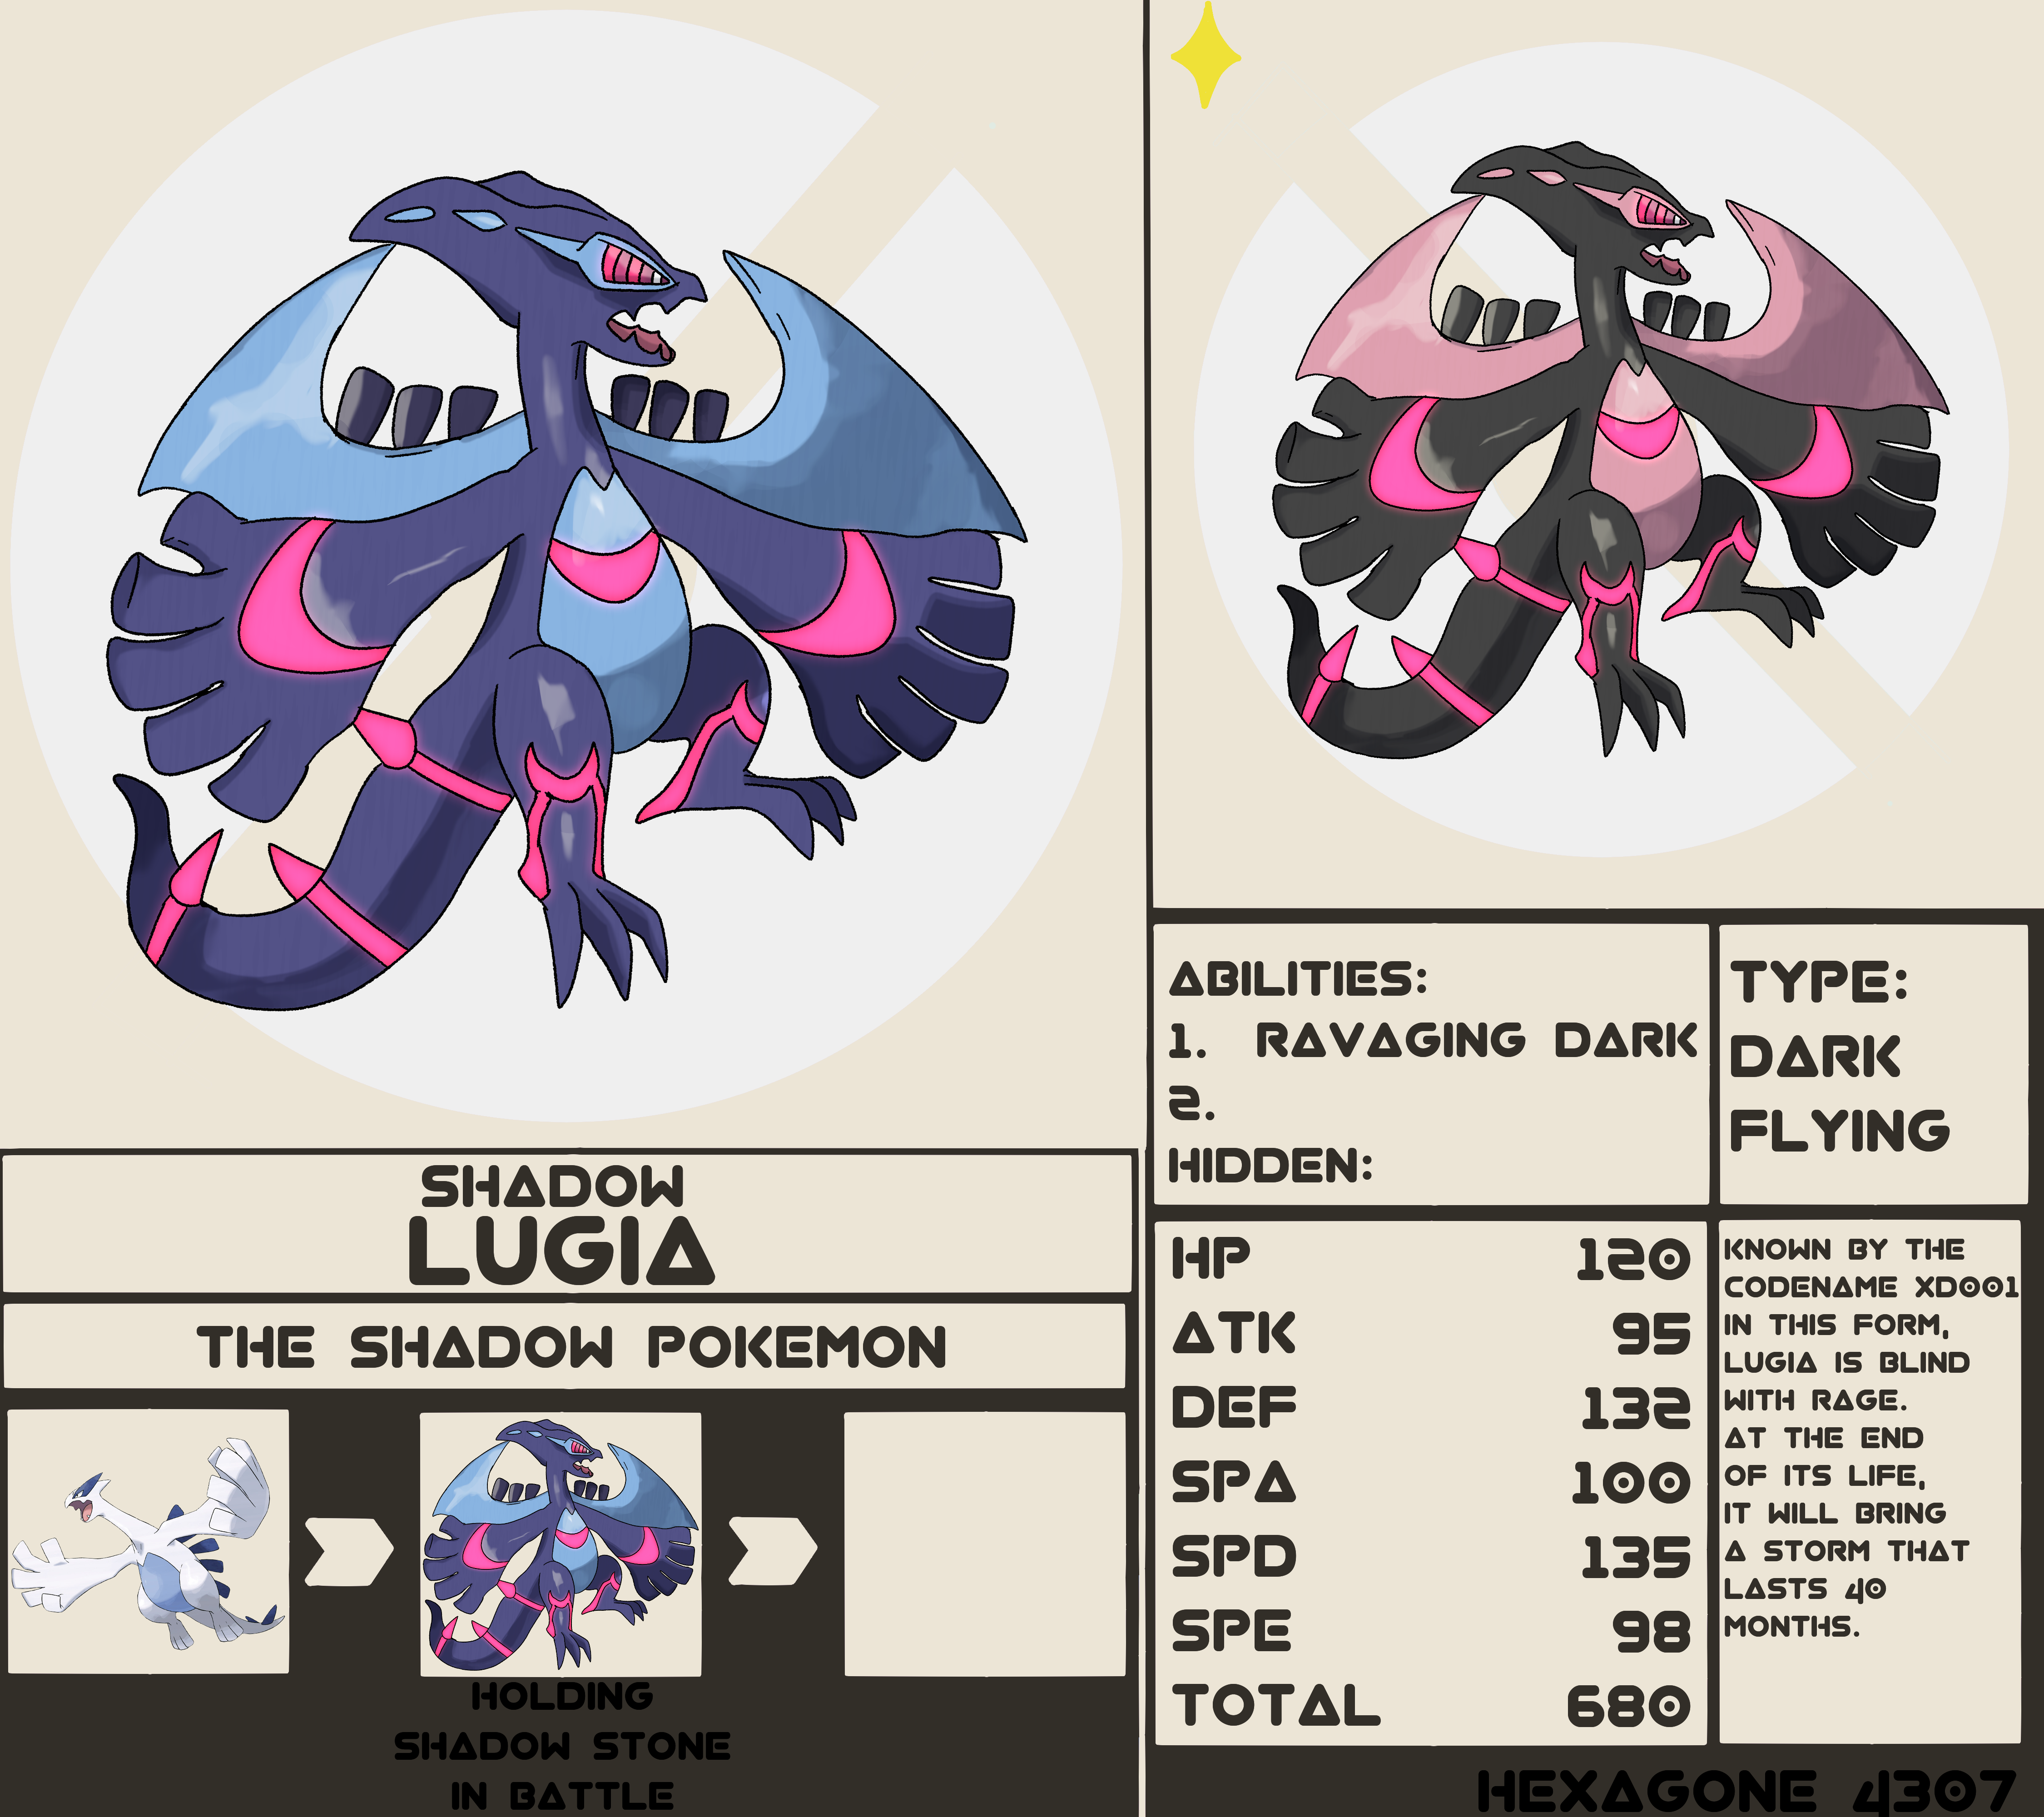 XD001-SHADOW LUGIA.png